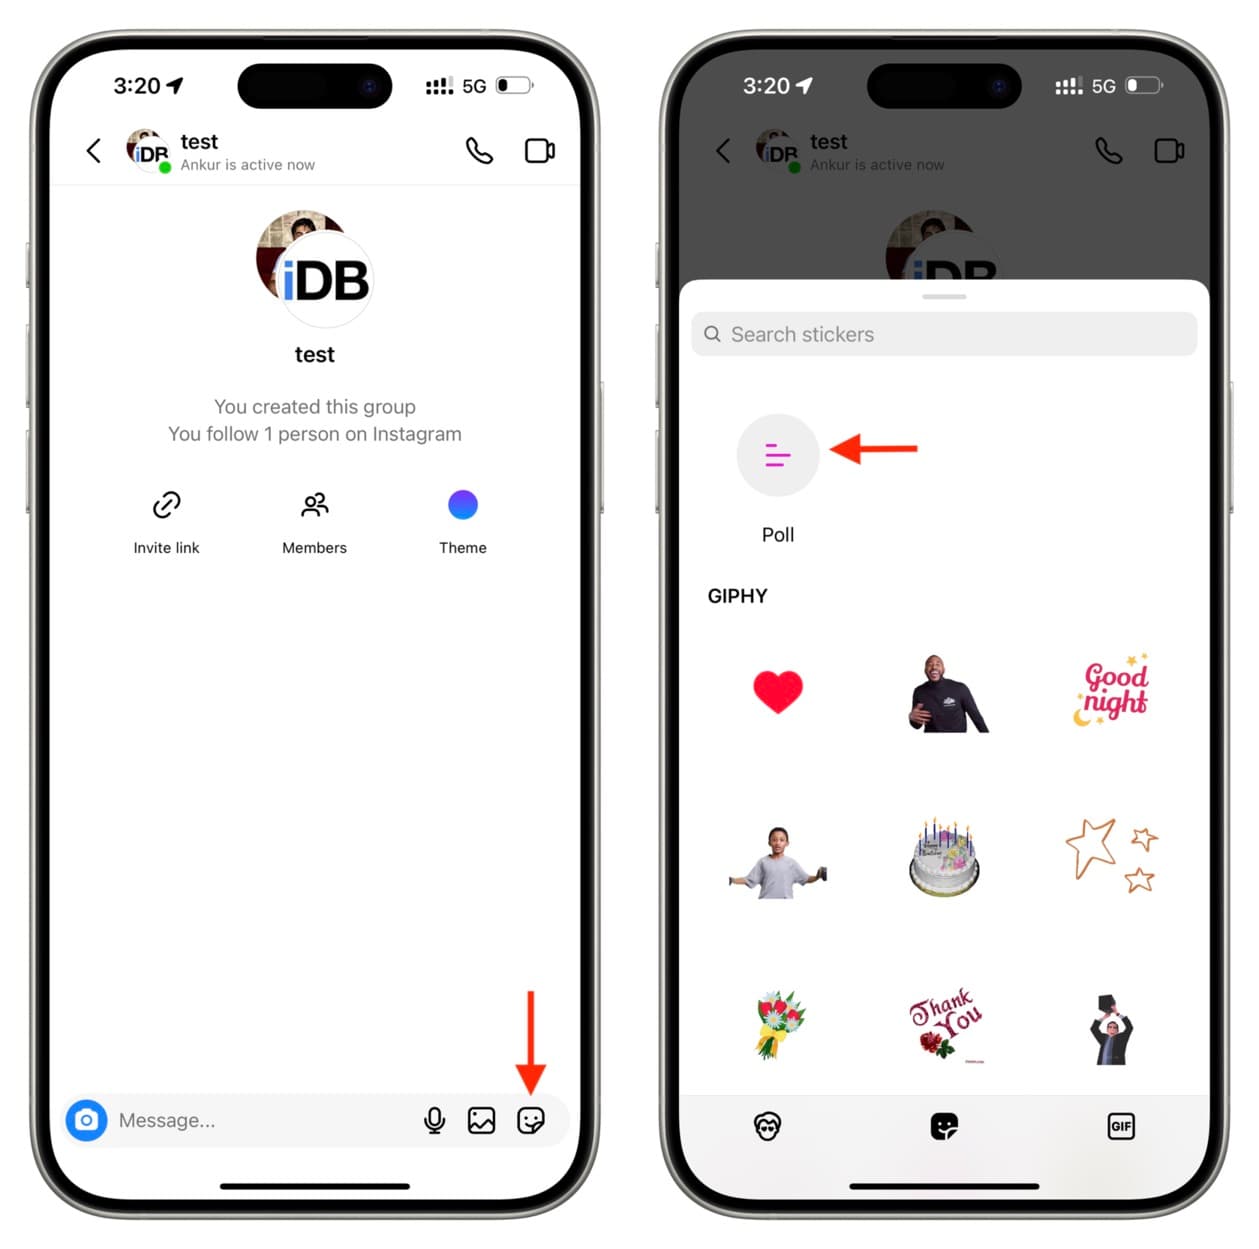 Tap emoji sticker icon in Instagram group chat and select Poll